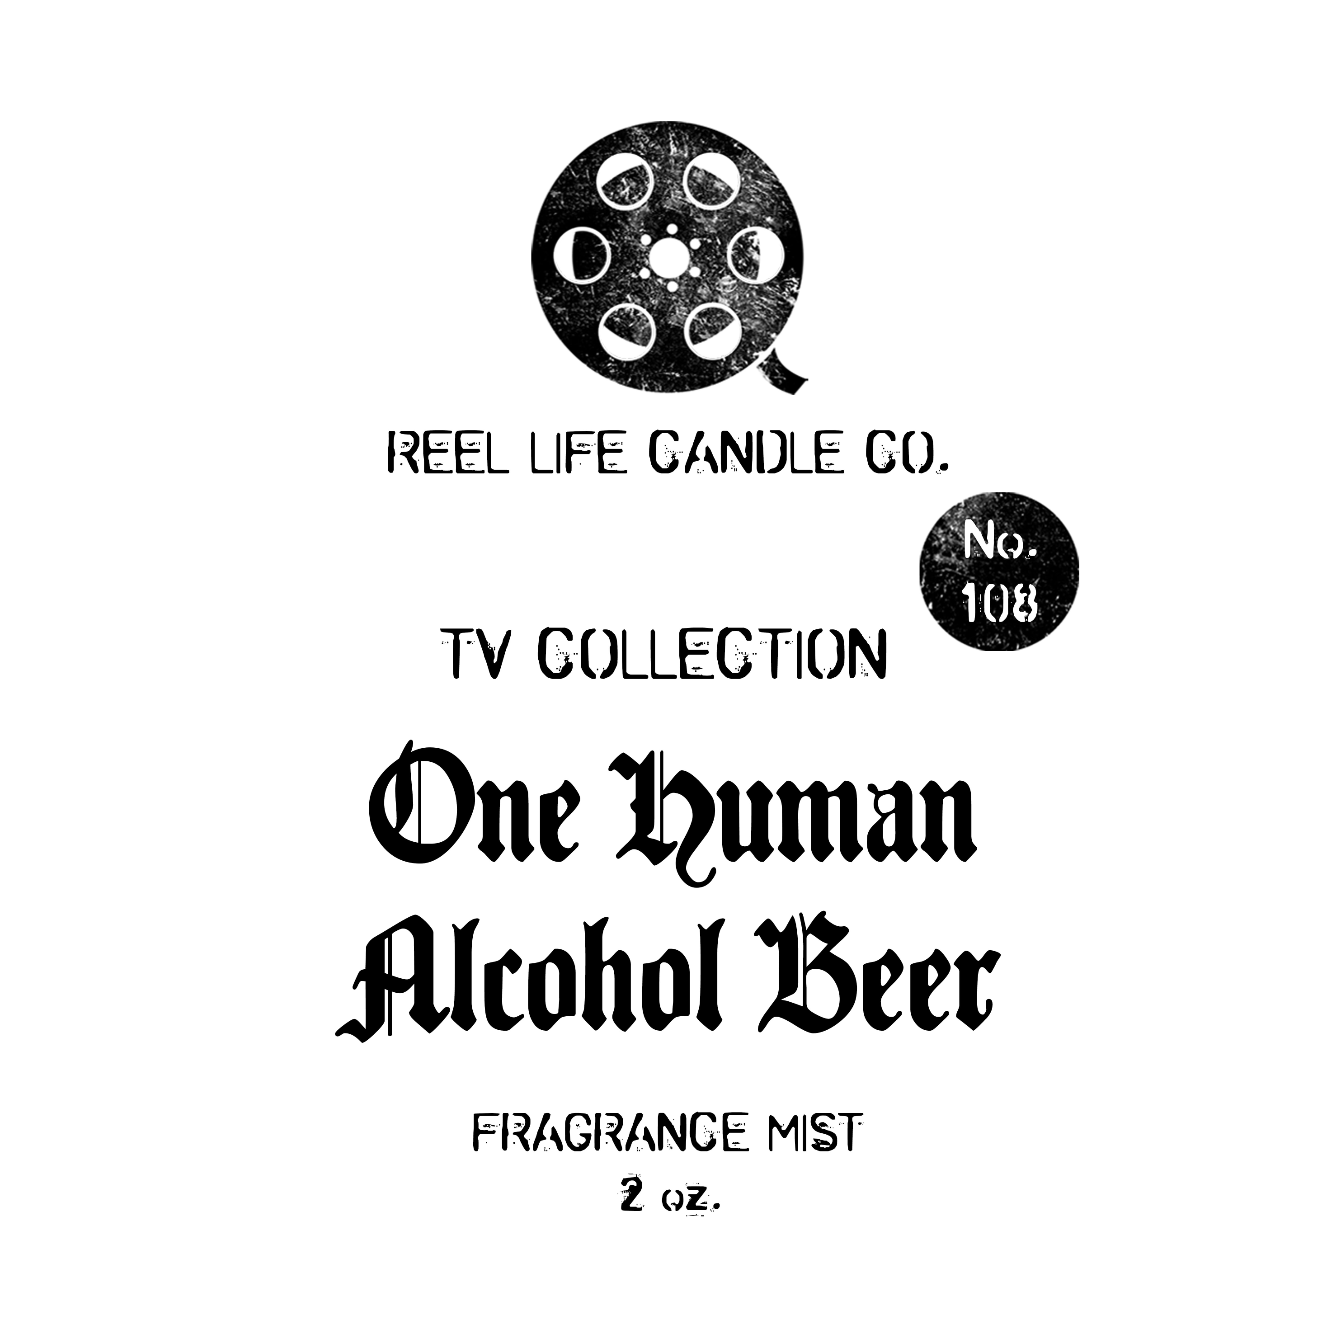 One Human Alcohol Beer Fragrance Mist